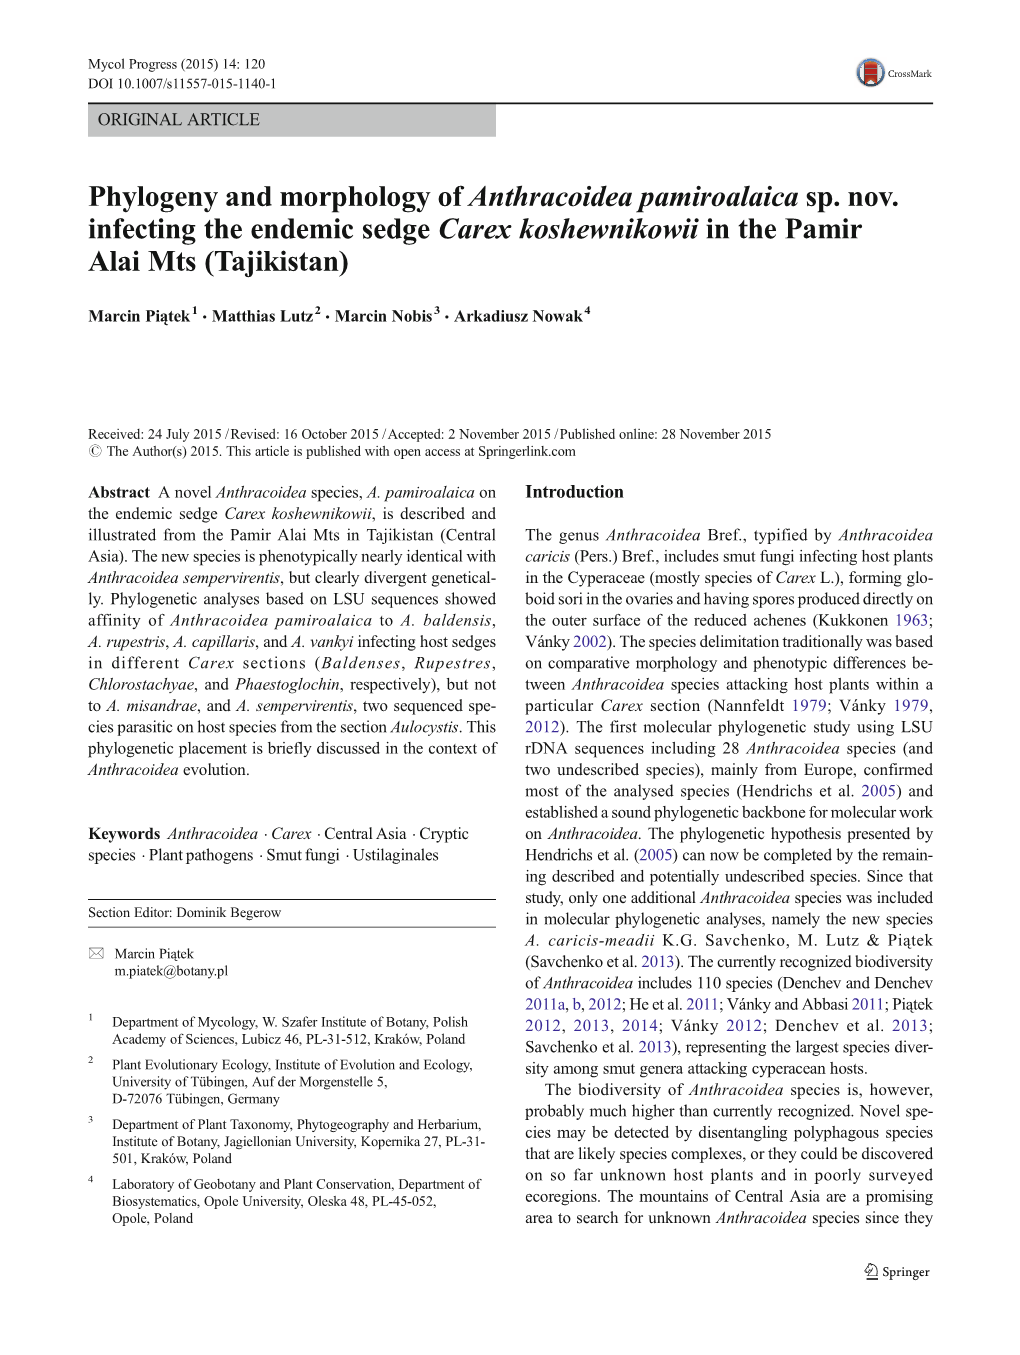 Phylogeny and Morphology of Anthracoidea Pamiroalaica Sp. Nov